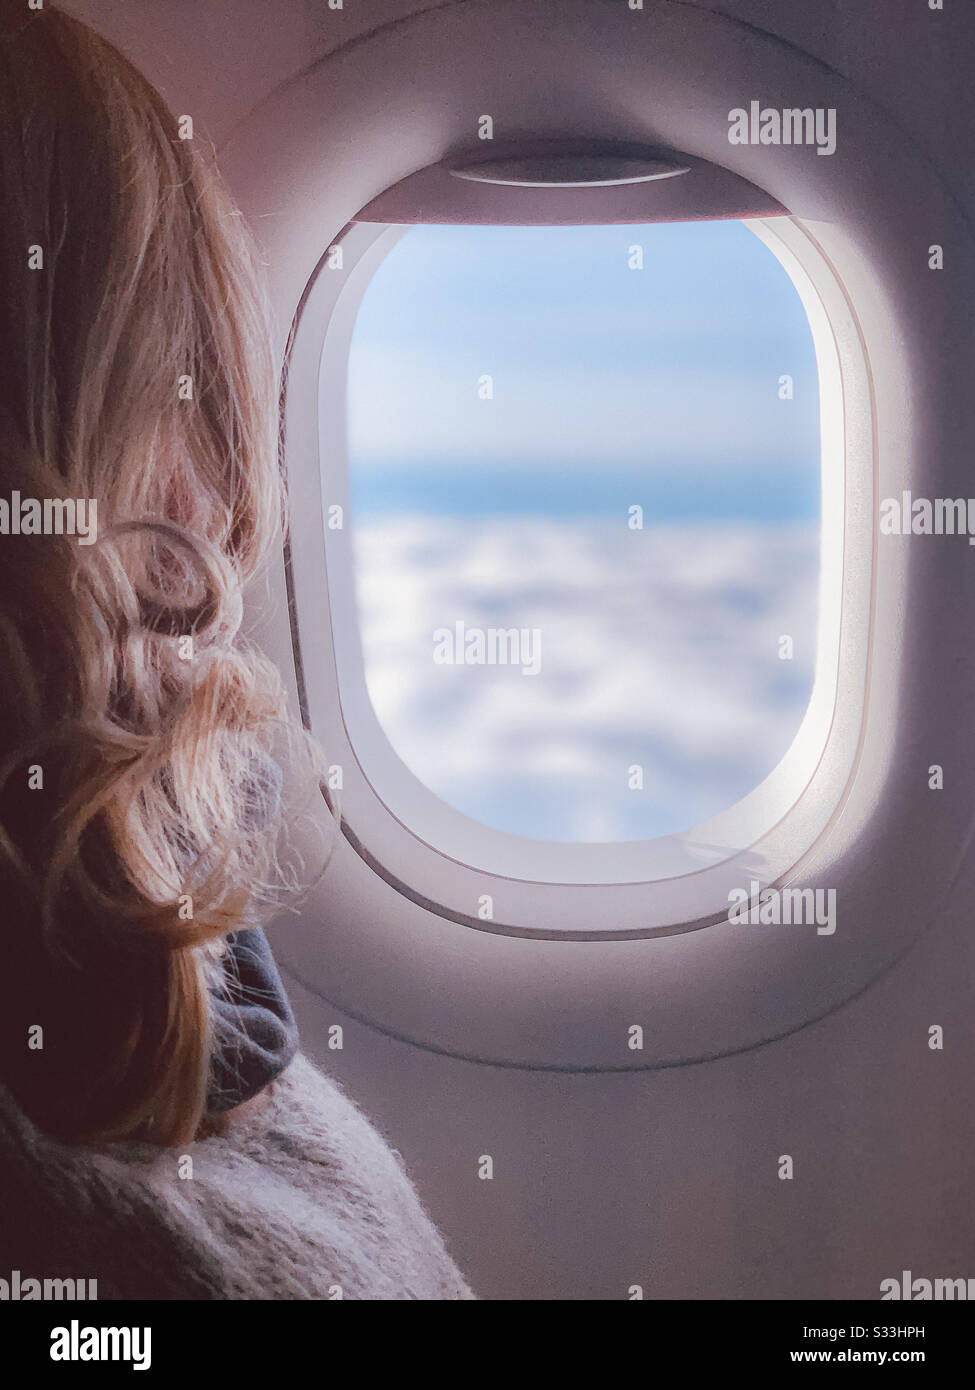 Passenger on a plane looking through the window at the clouds Stock Photo